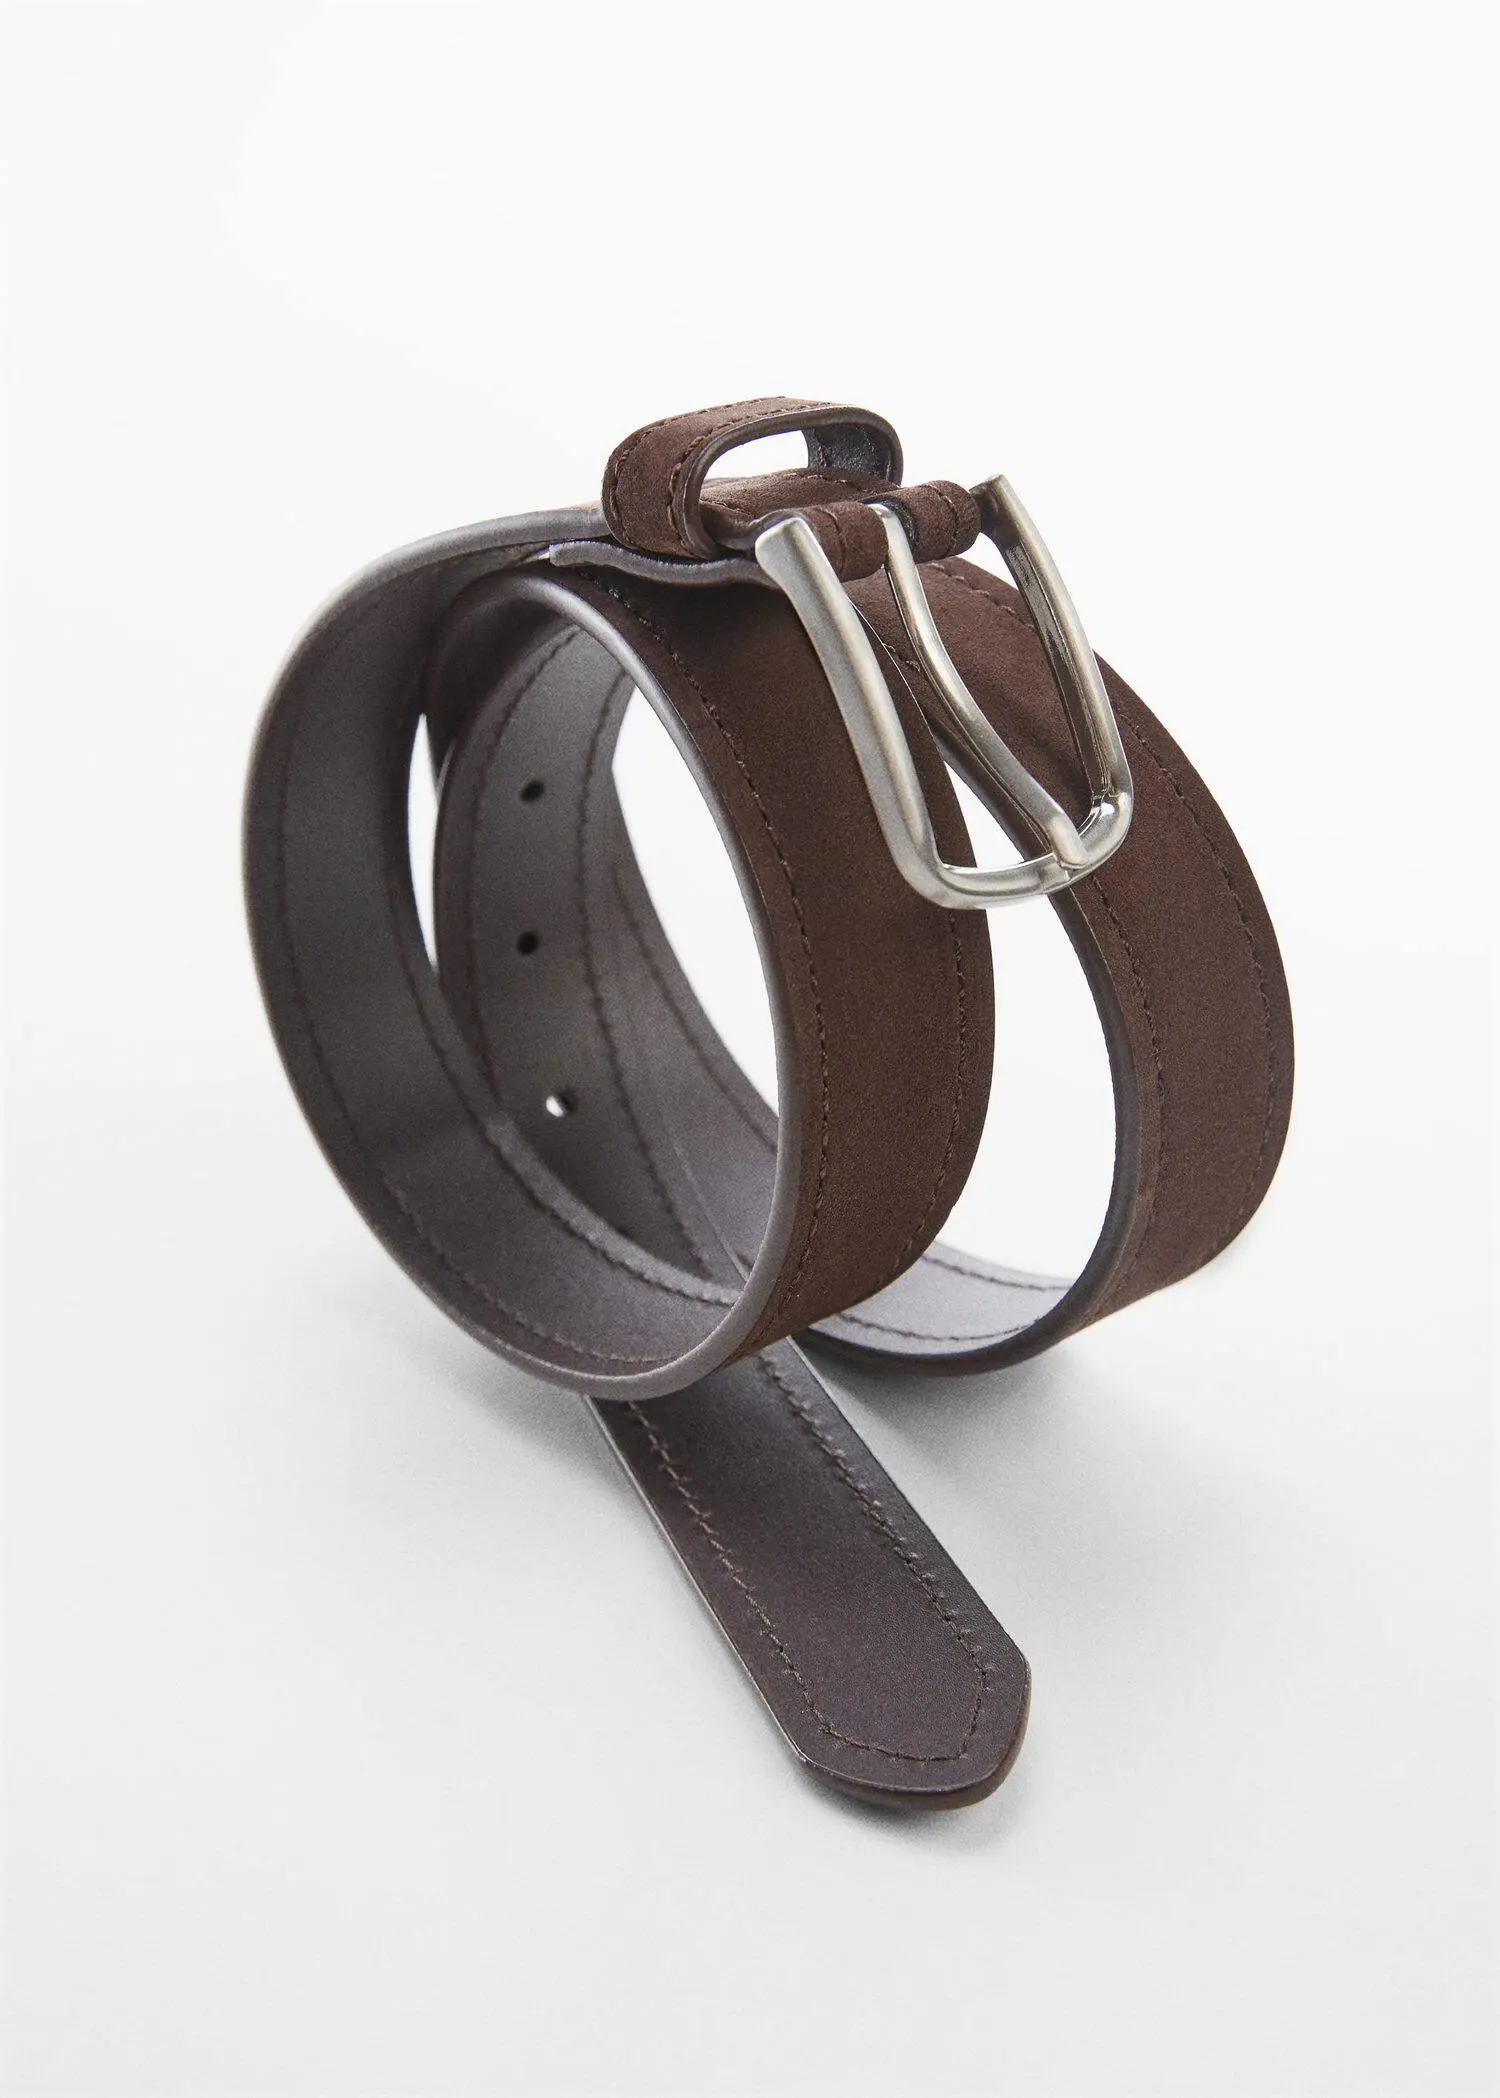 Mango Suede leather belt. a close up of a belt on a white surface 